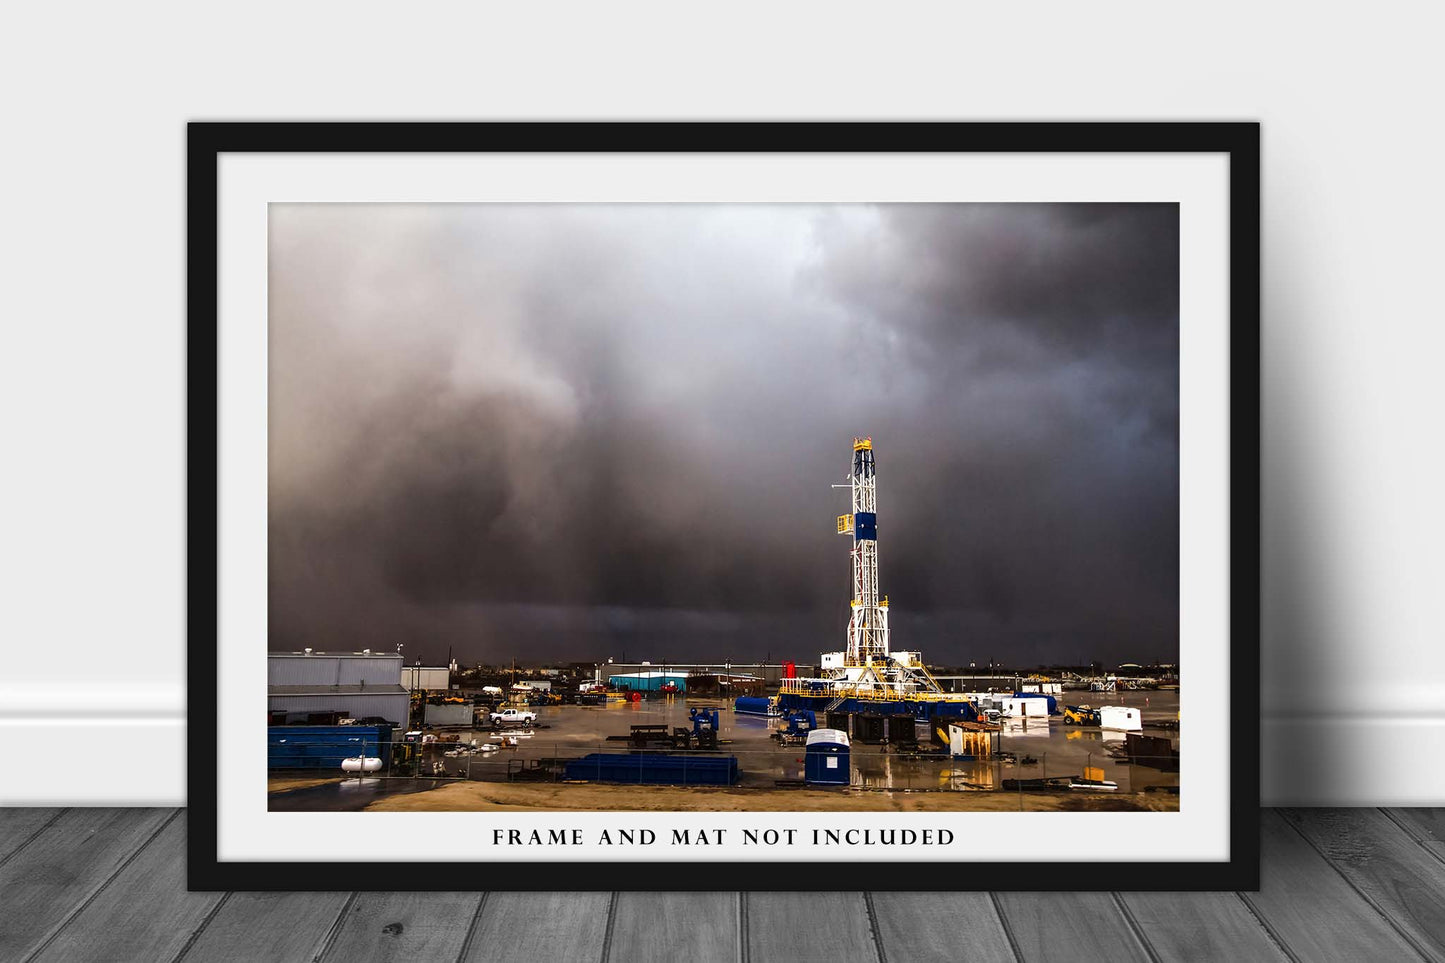 Oilfield Photography Print - Wall Art Picture of Drilling Rig Yard and Intense Storm in Central Oklahoma Oil Rig Derrick Scenic Decor